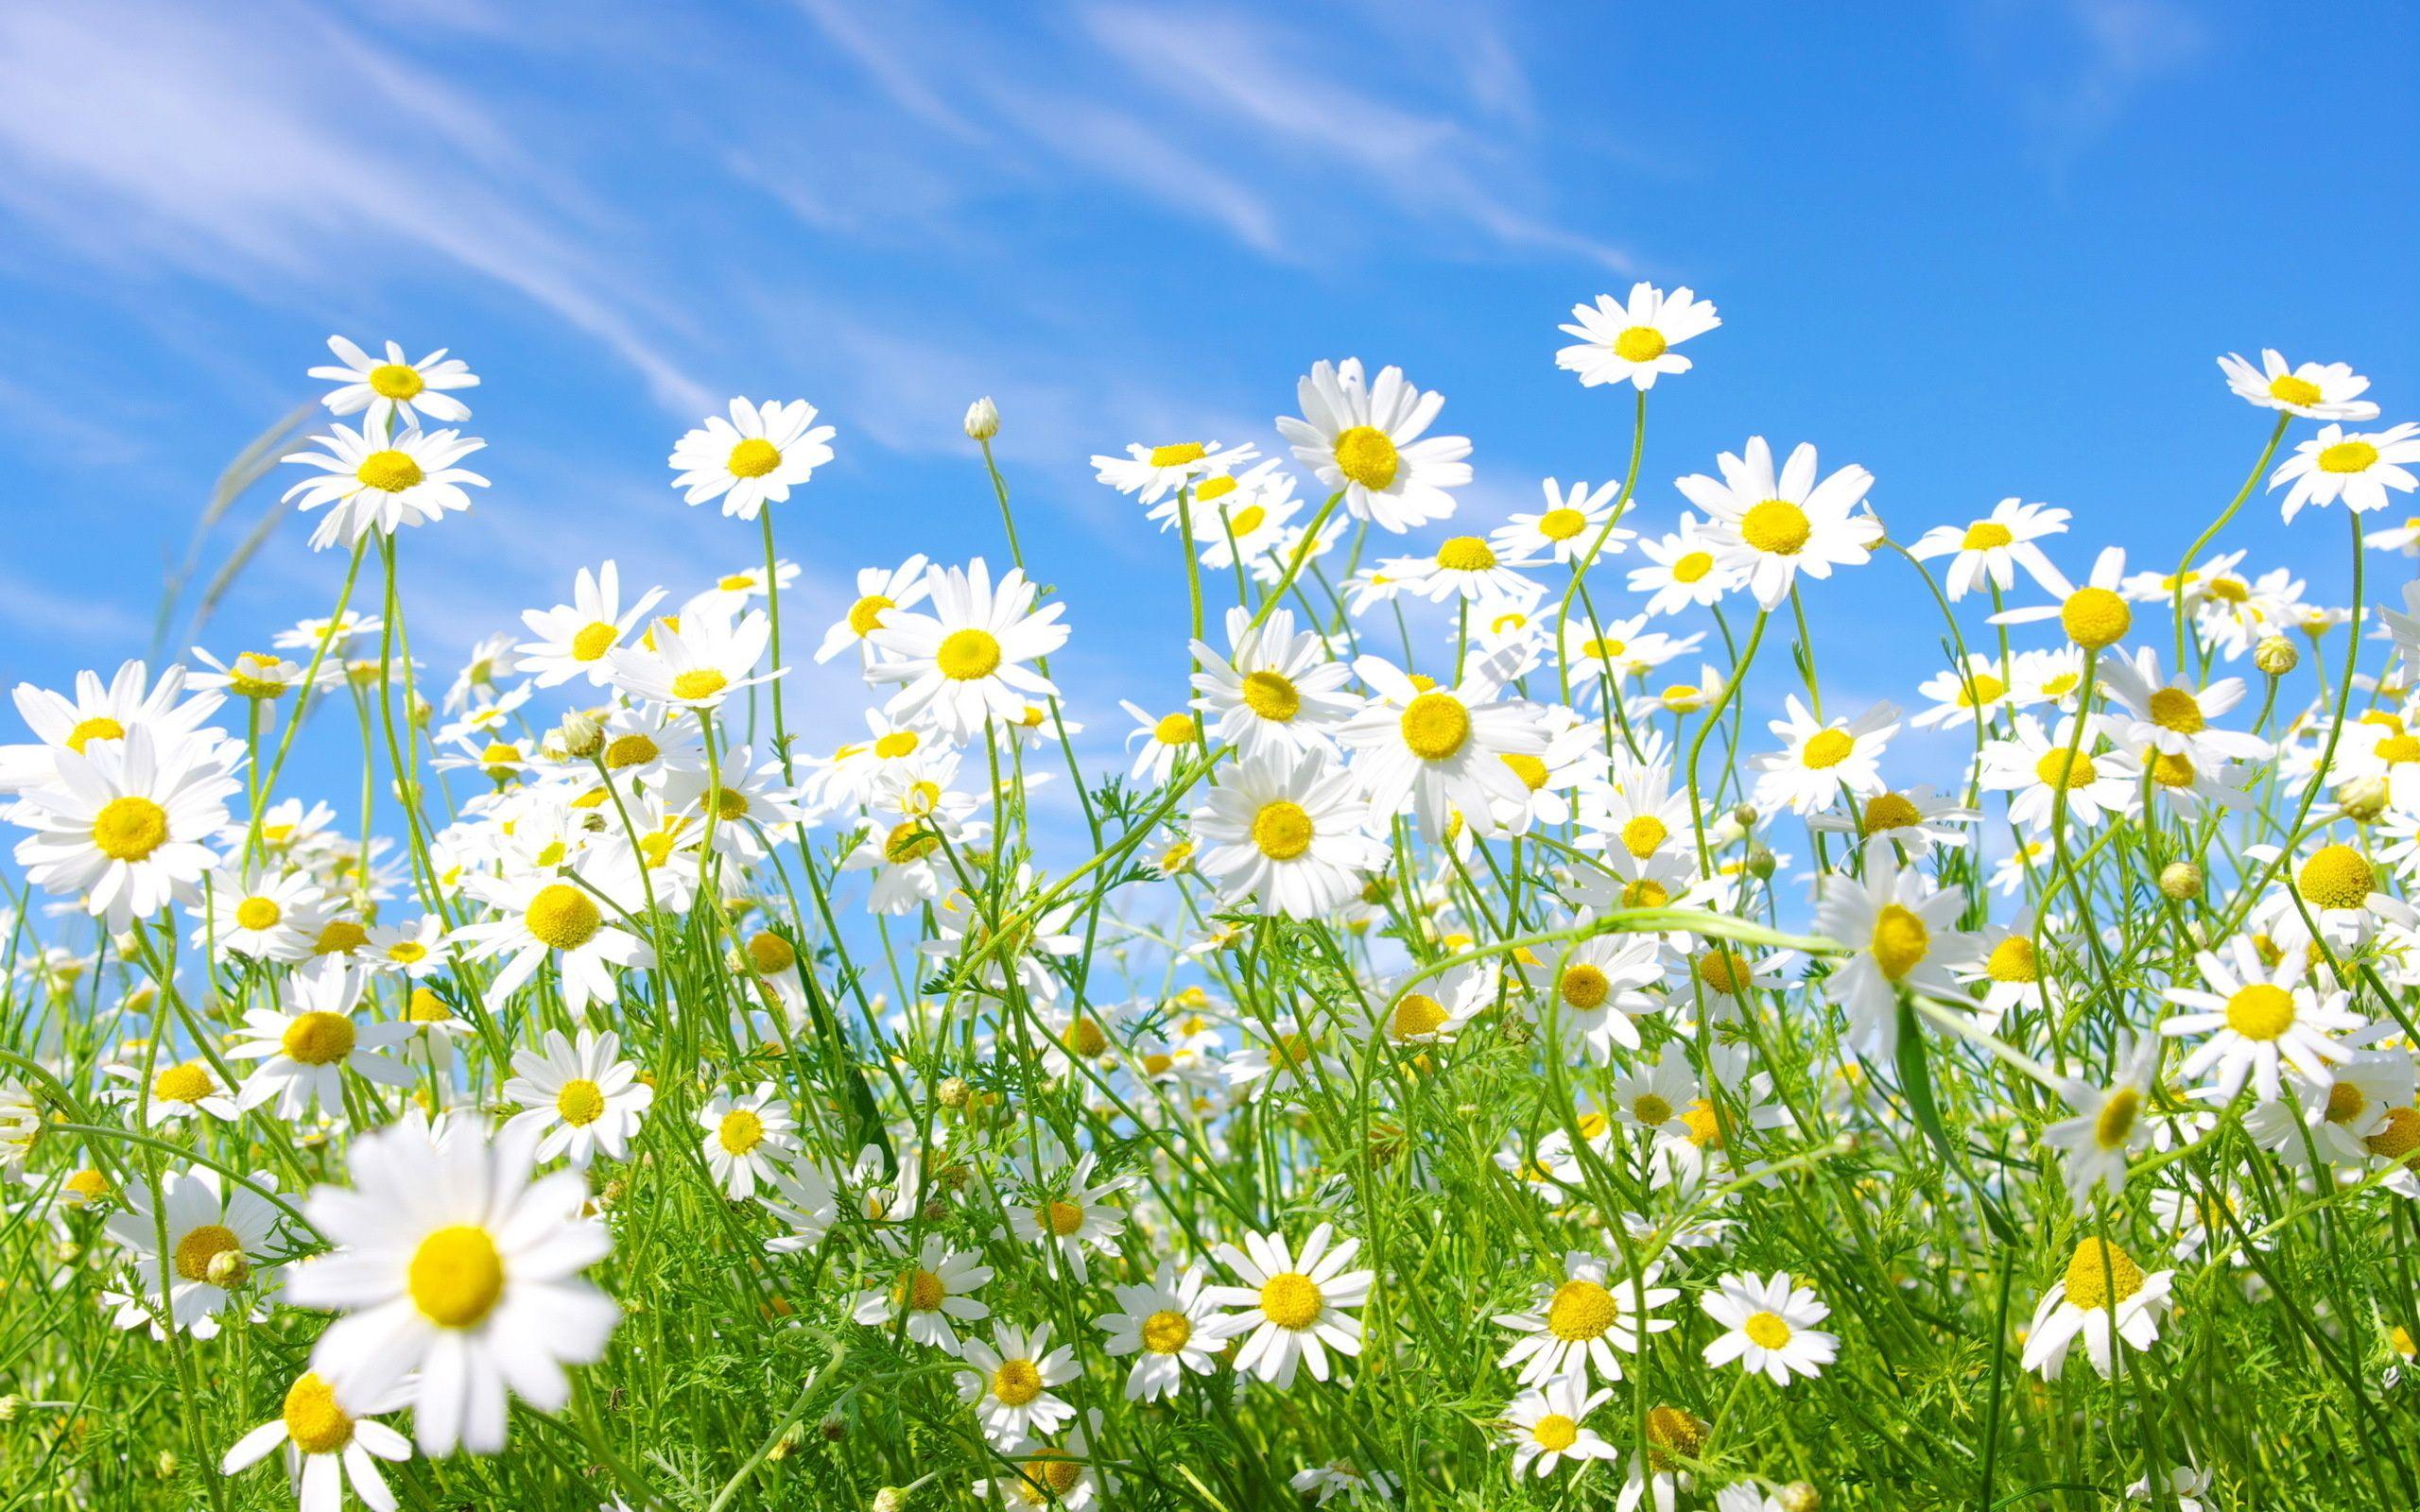 Daisy HD Wallpaper and Background Image